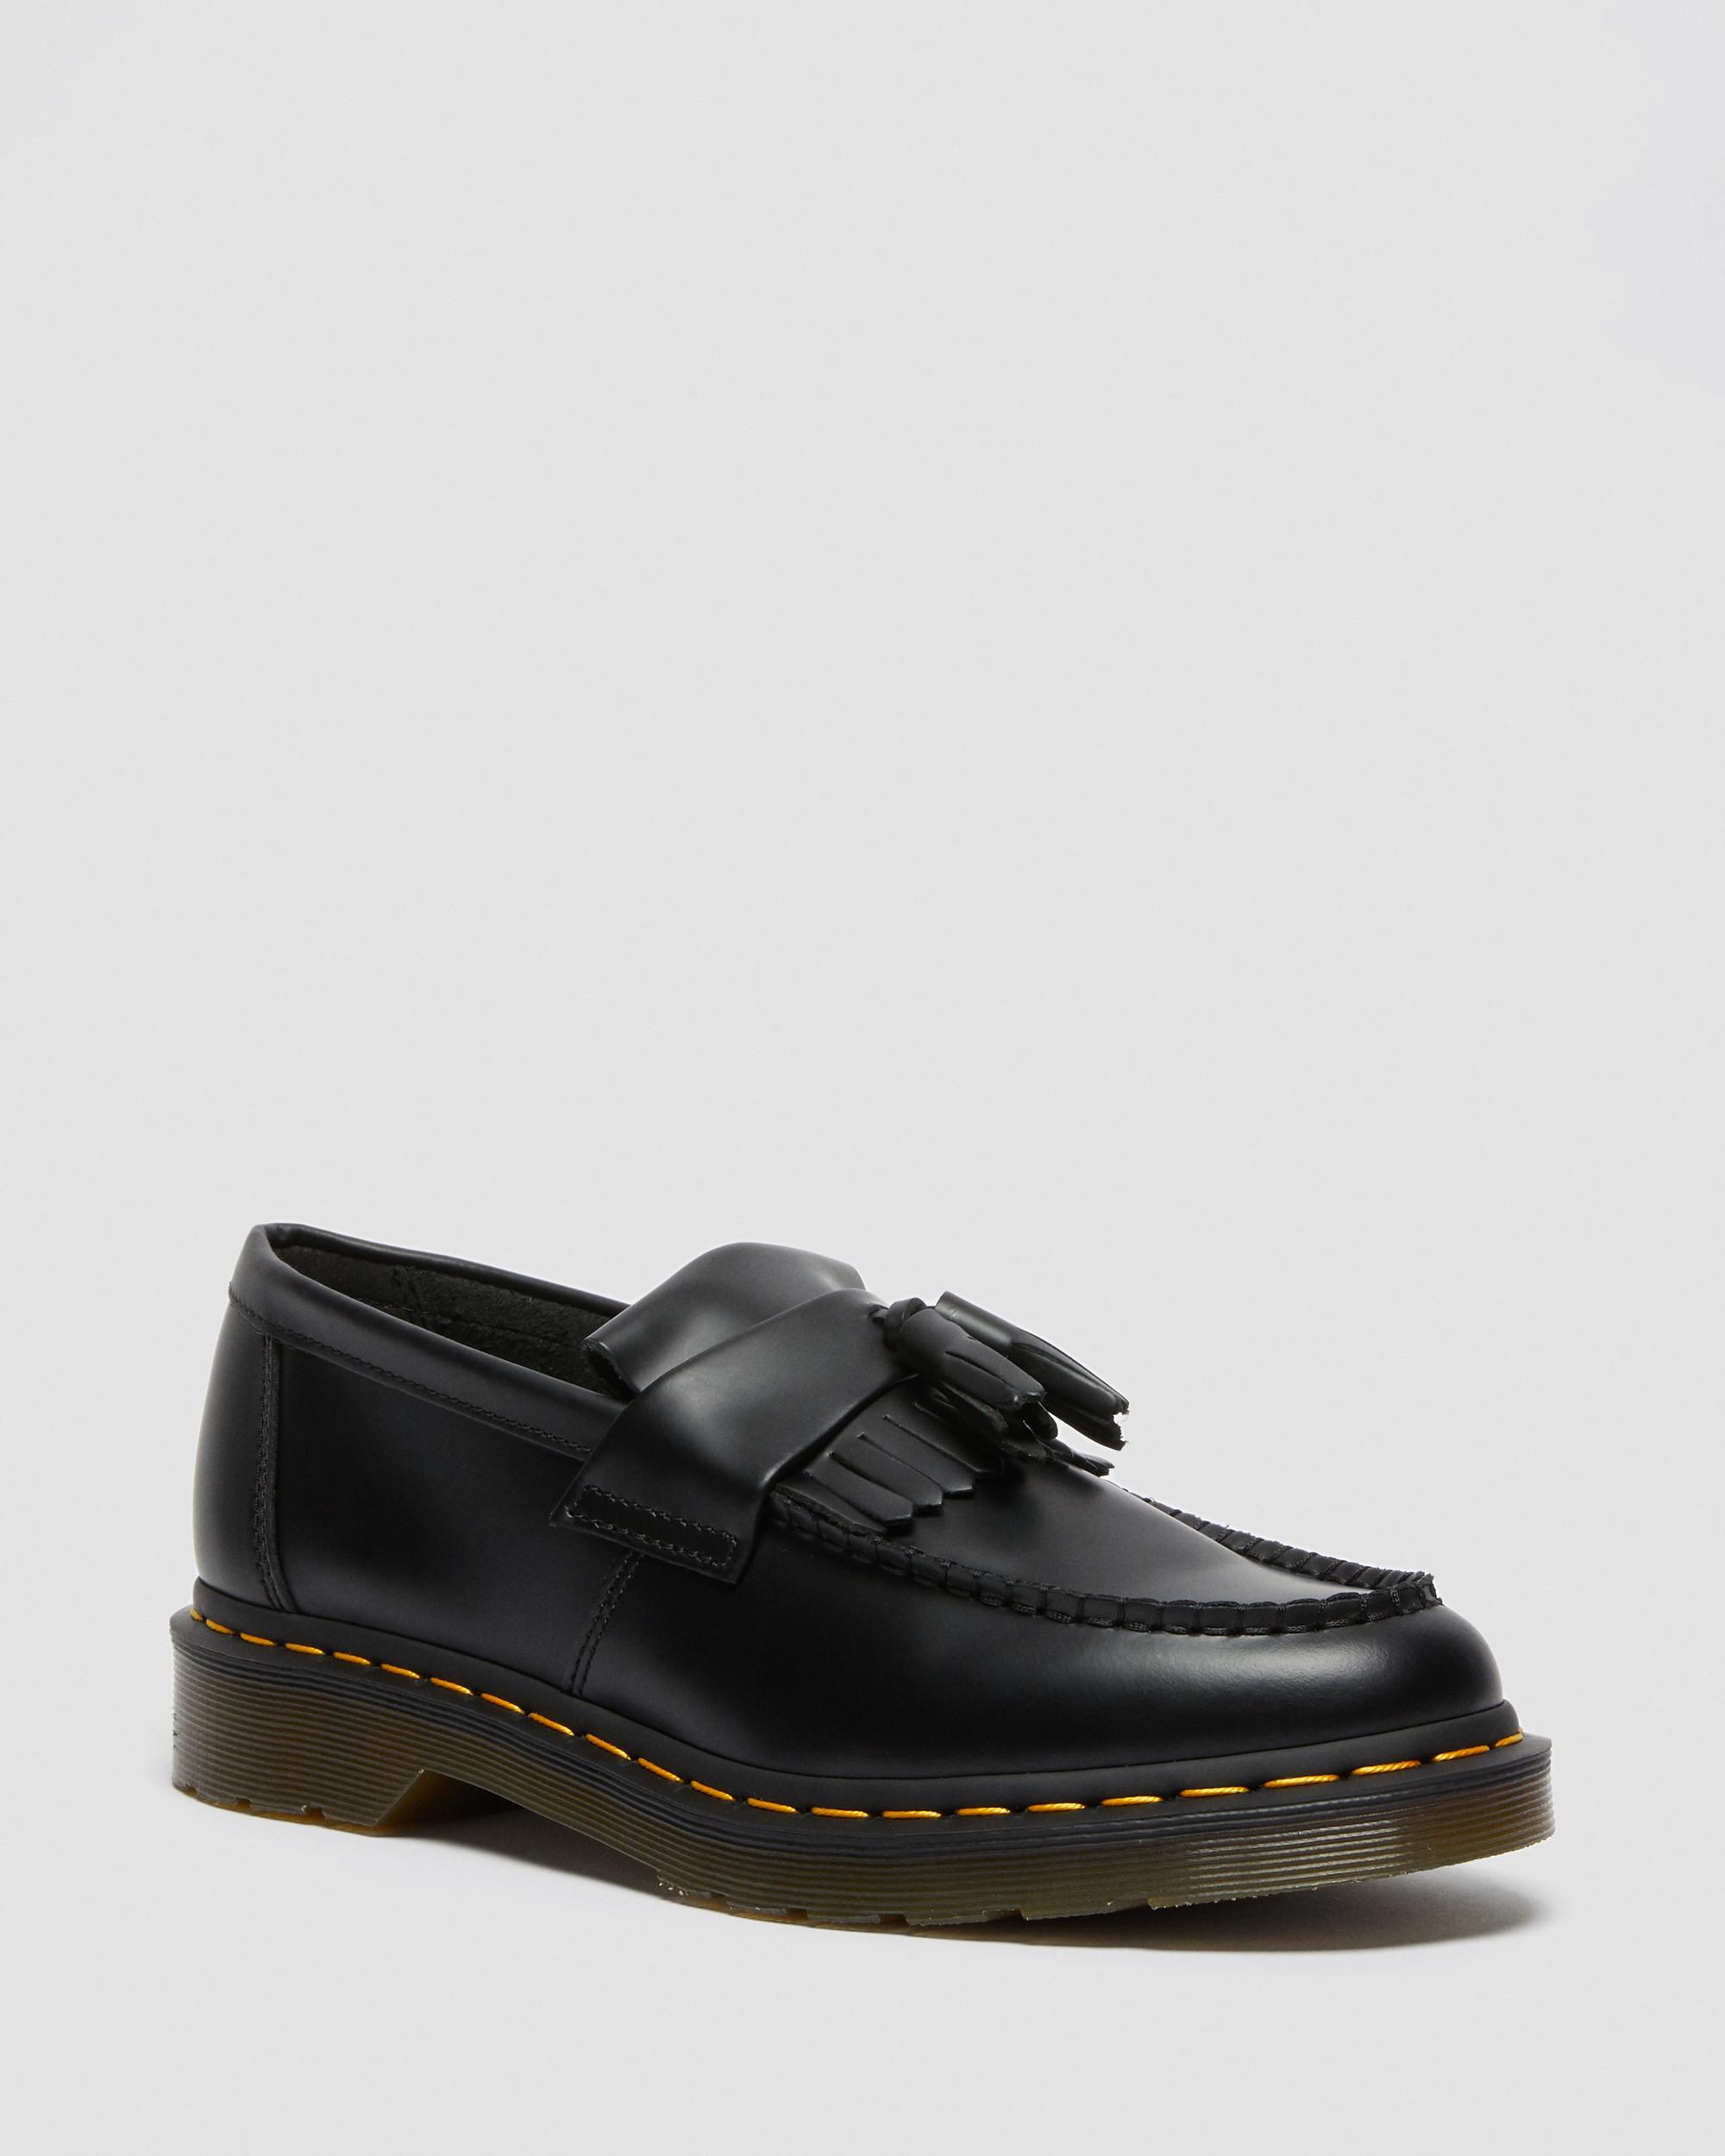 Dr. Martens Leather Adrian Yellow Stitch Smooth Tassle Loafers in Black ...